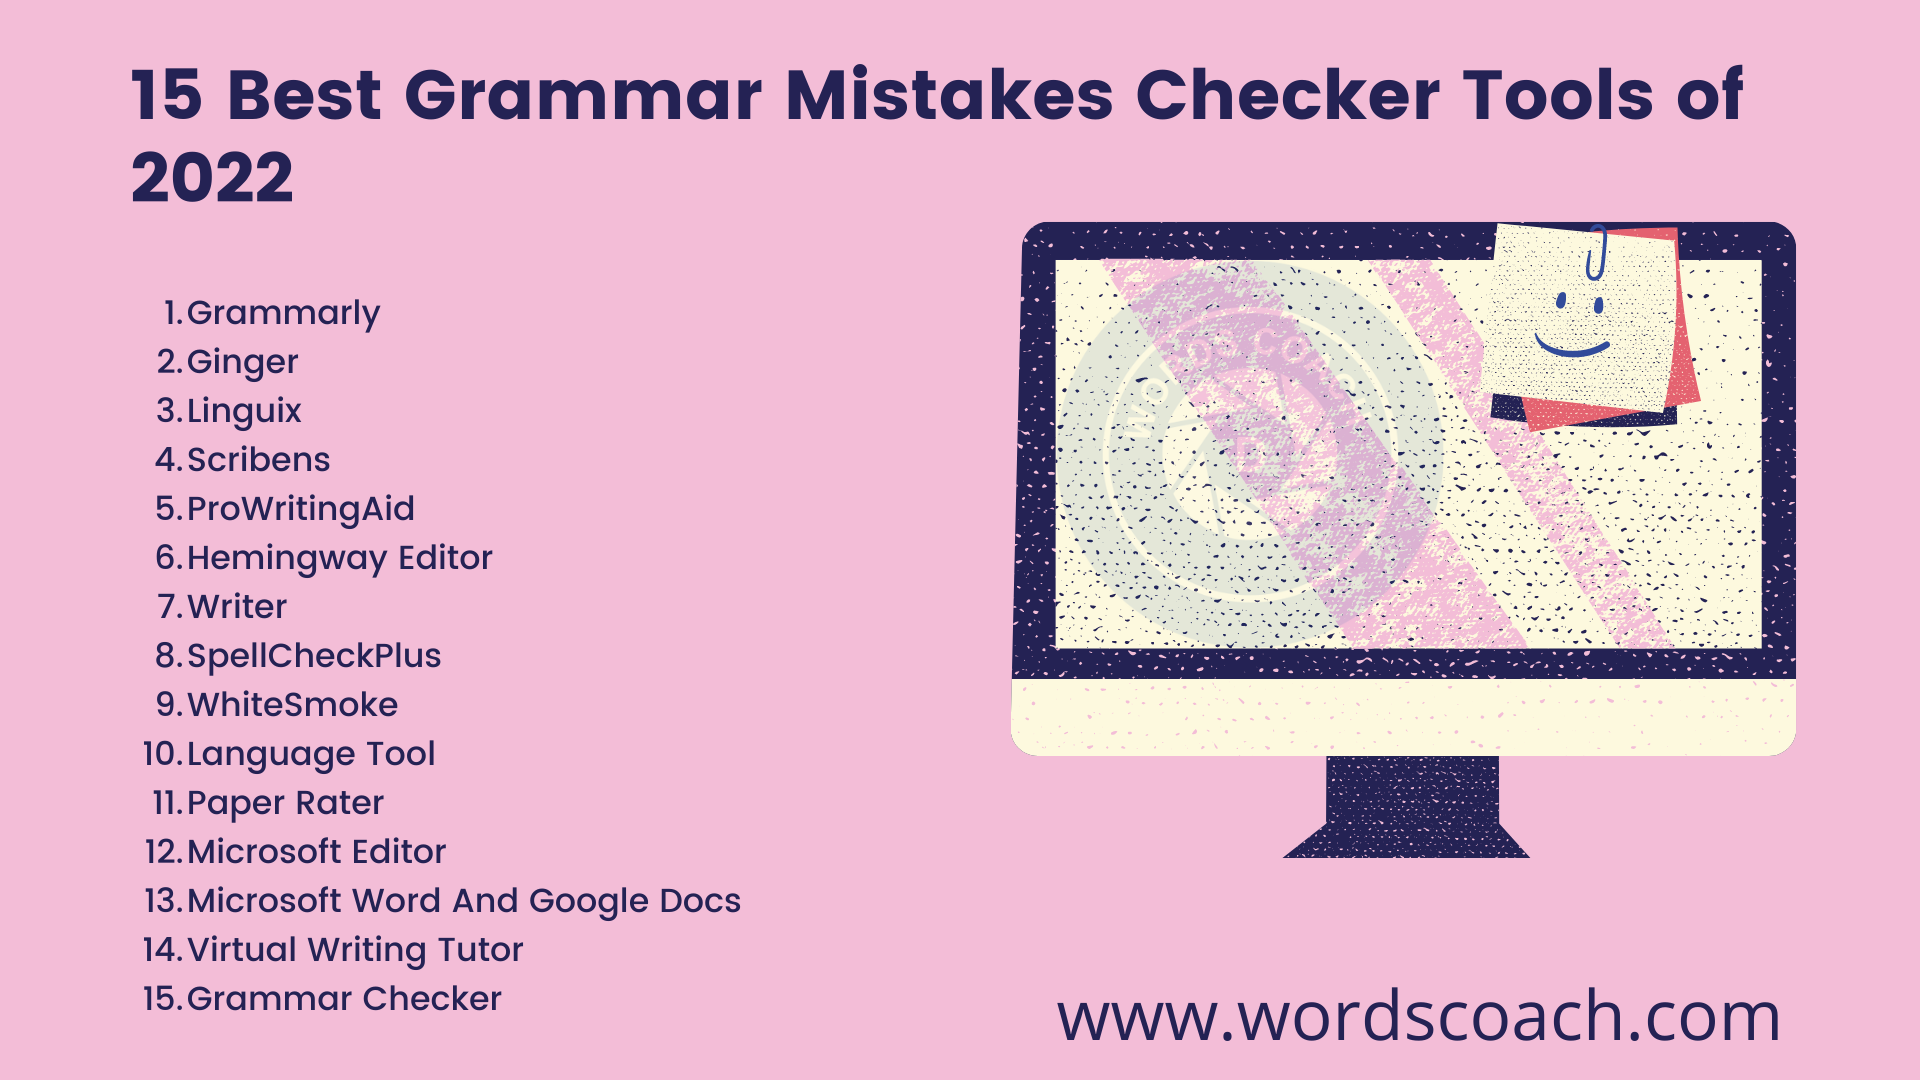 15 Best Grammar Mistakes Checker Tools of 2022